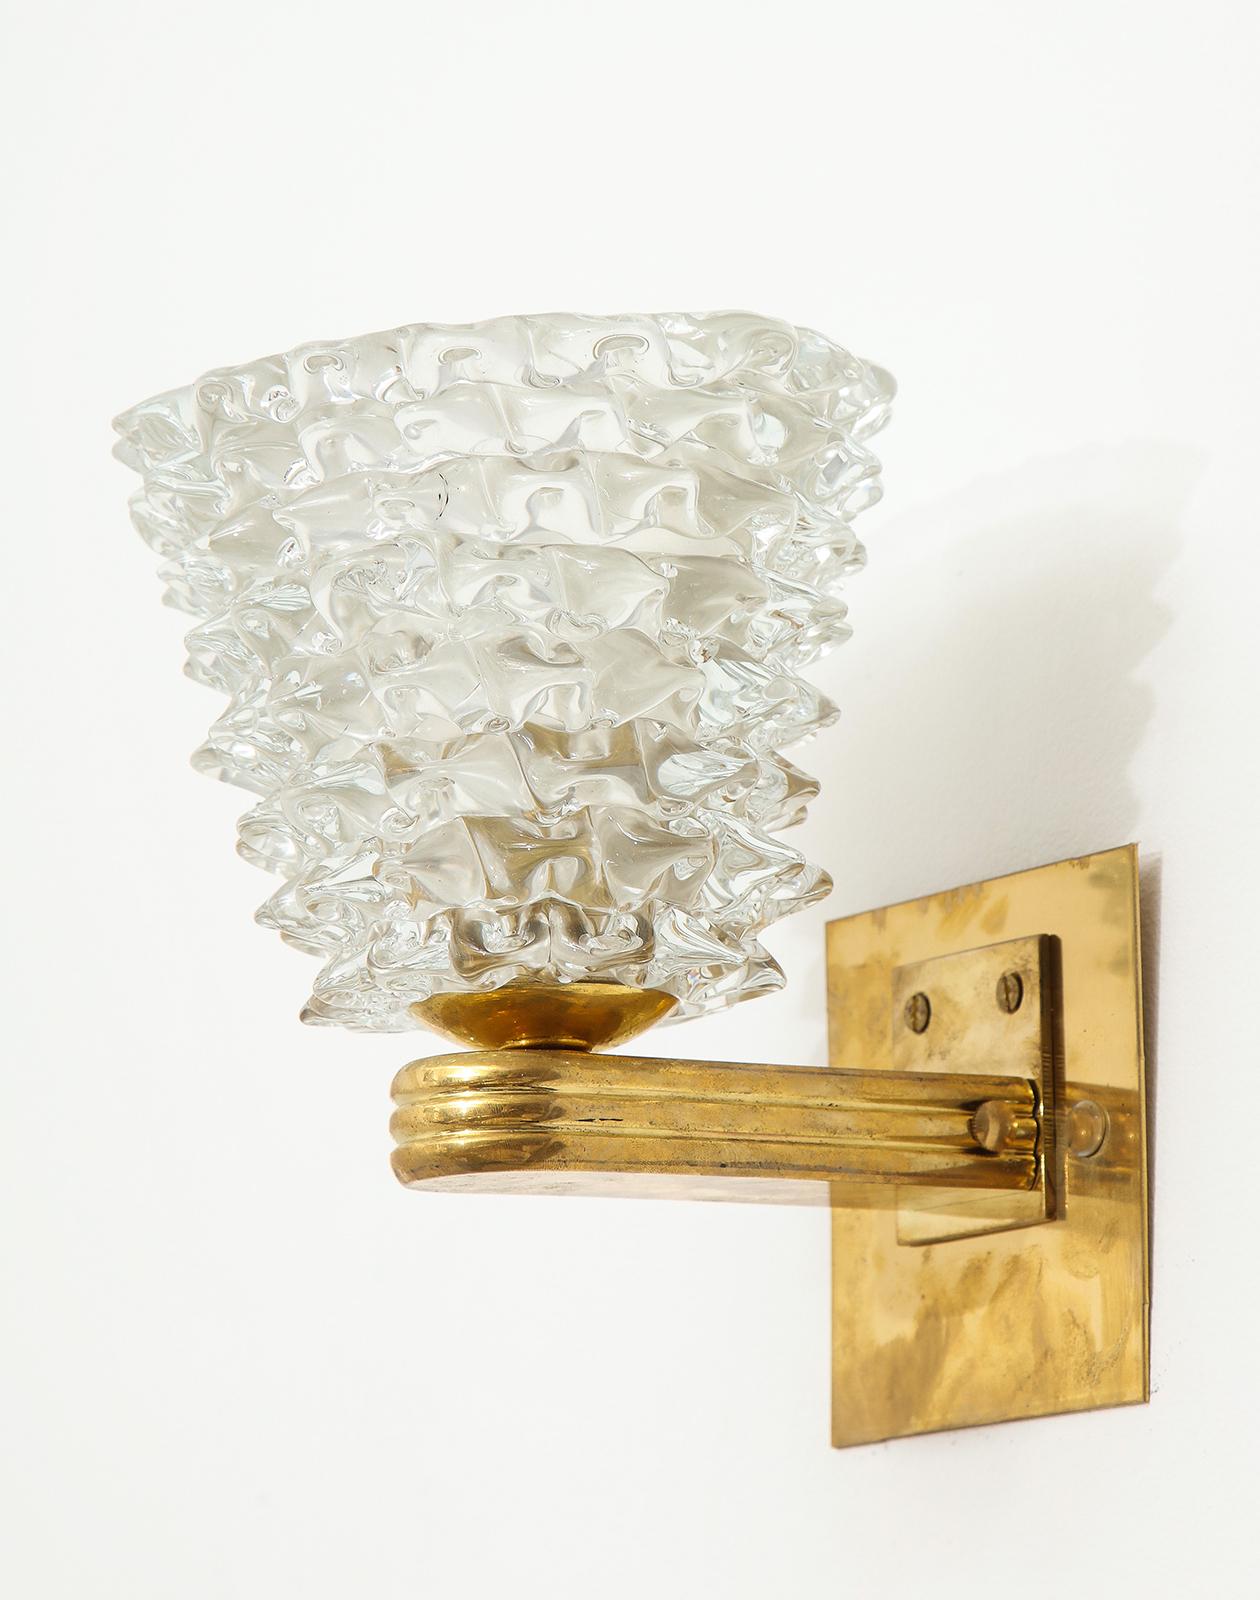 Pair of Bespoke Murano Glass Sconces For Sale 2